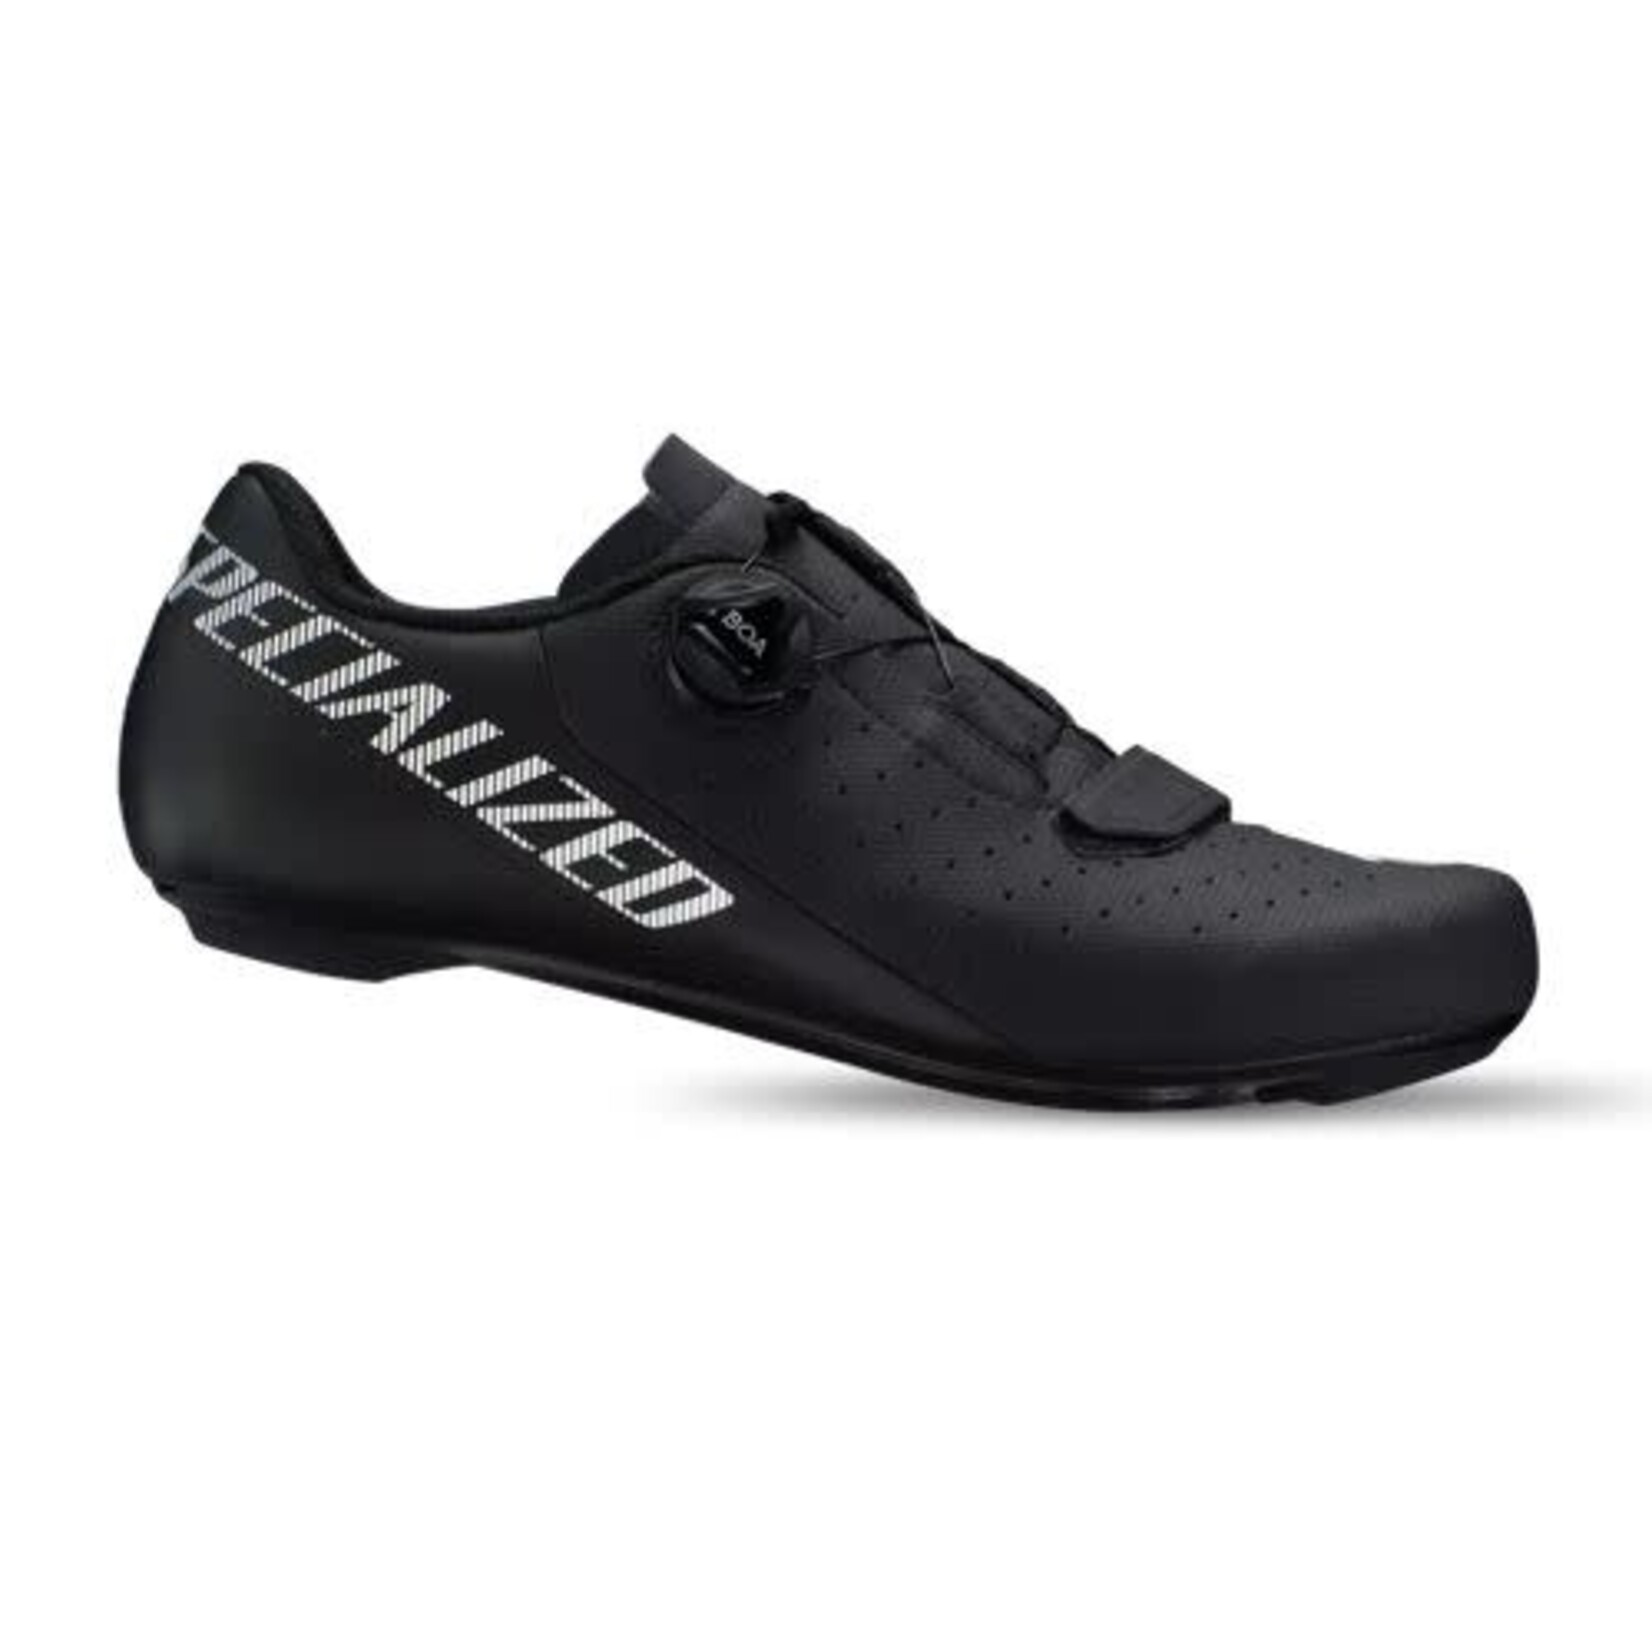 Specialized TORCH 1.0 RD SHOE BLACK 43